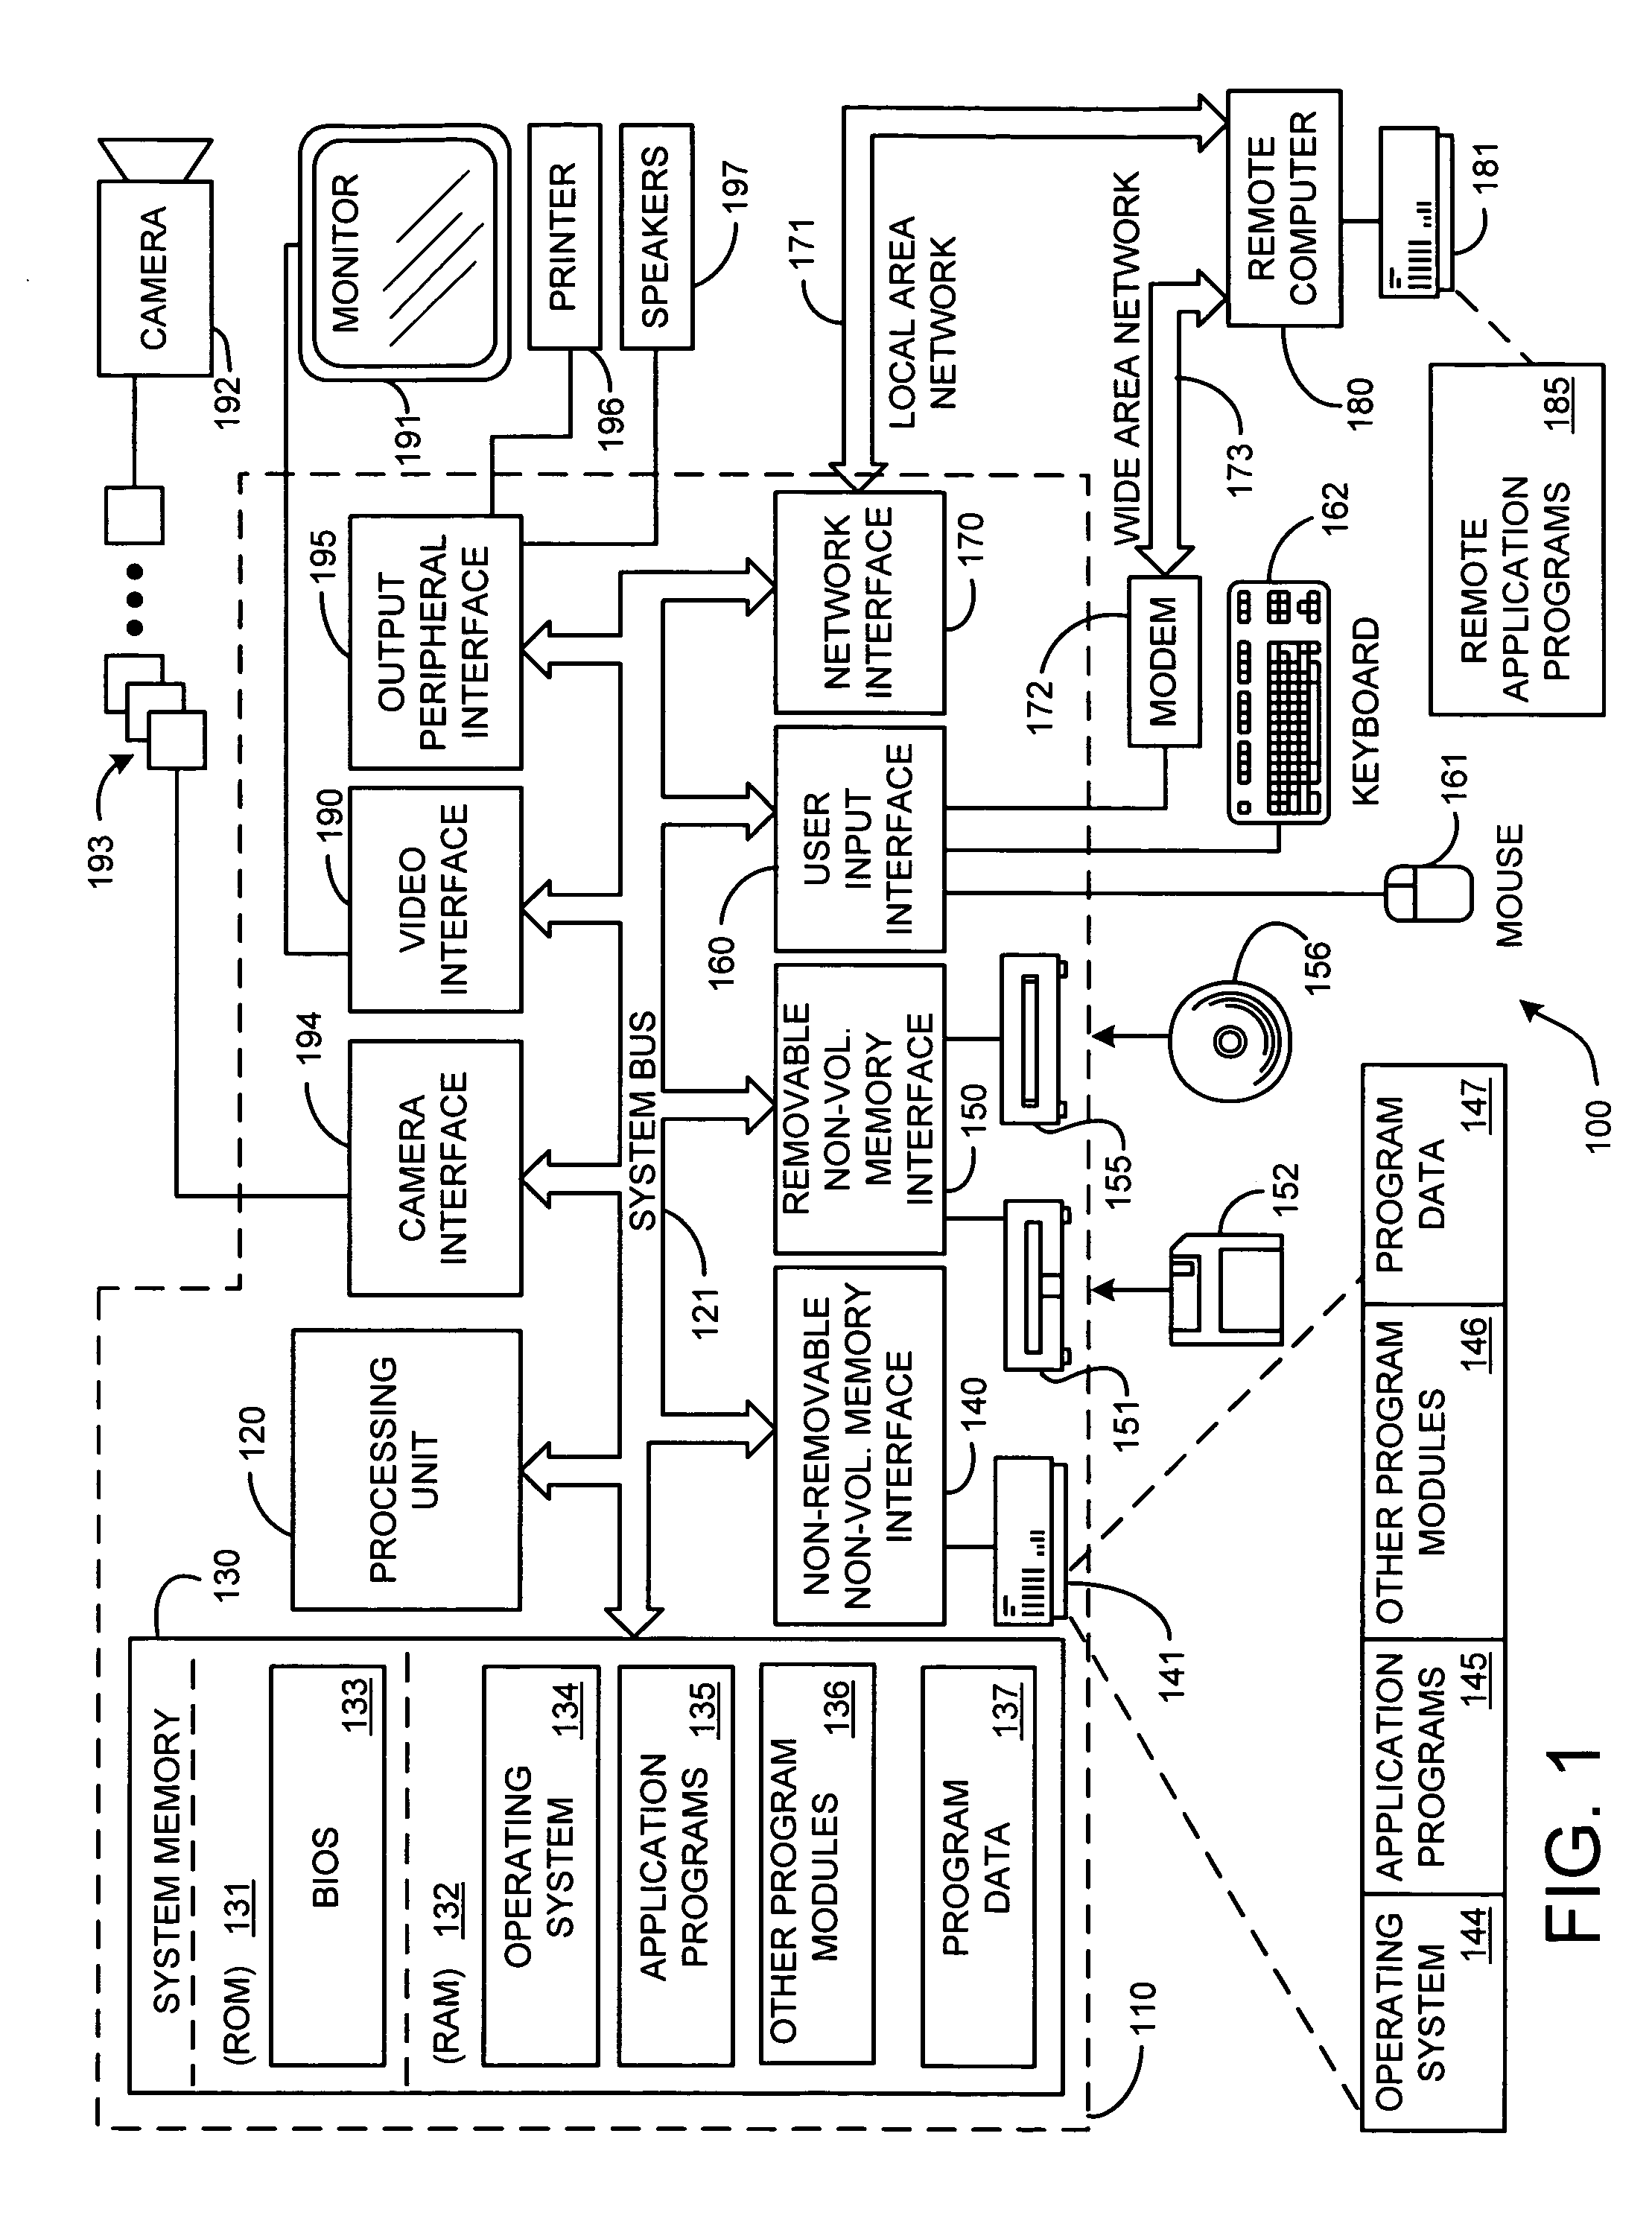 System and process for generating a two-layer, 3D representation of a scene